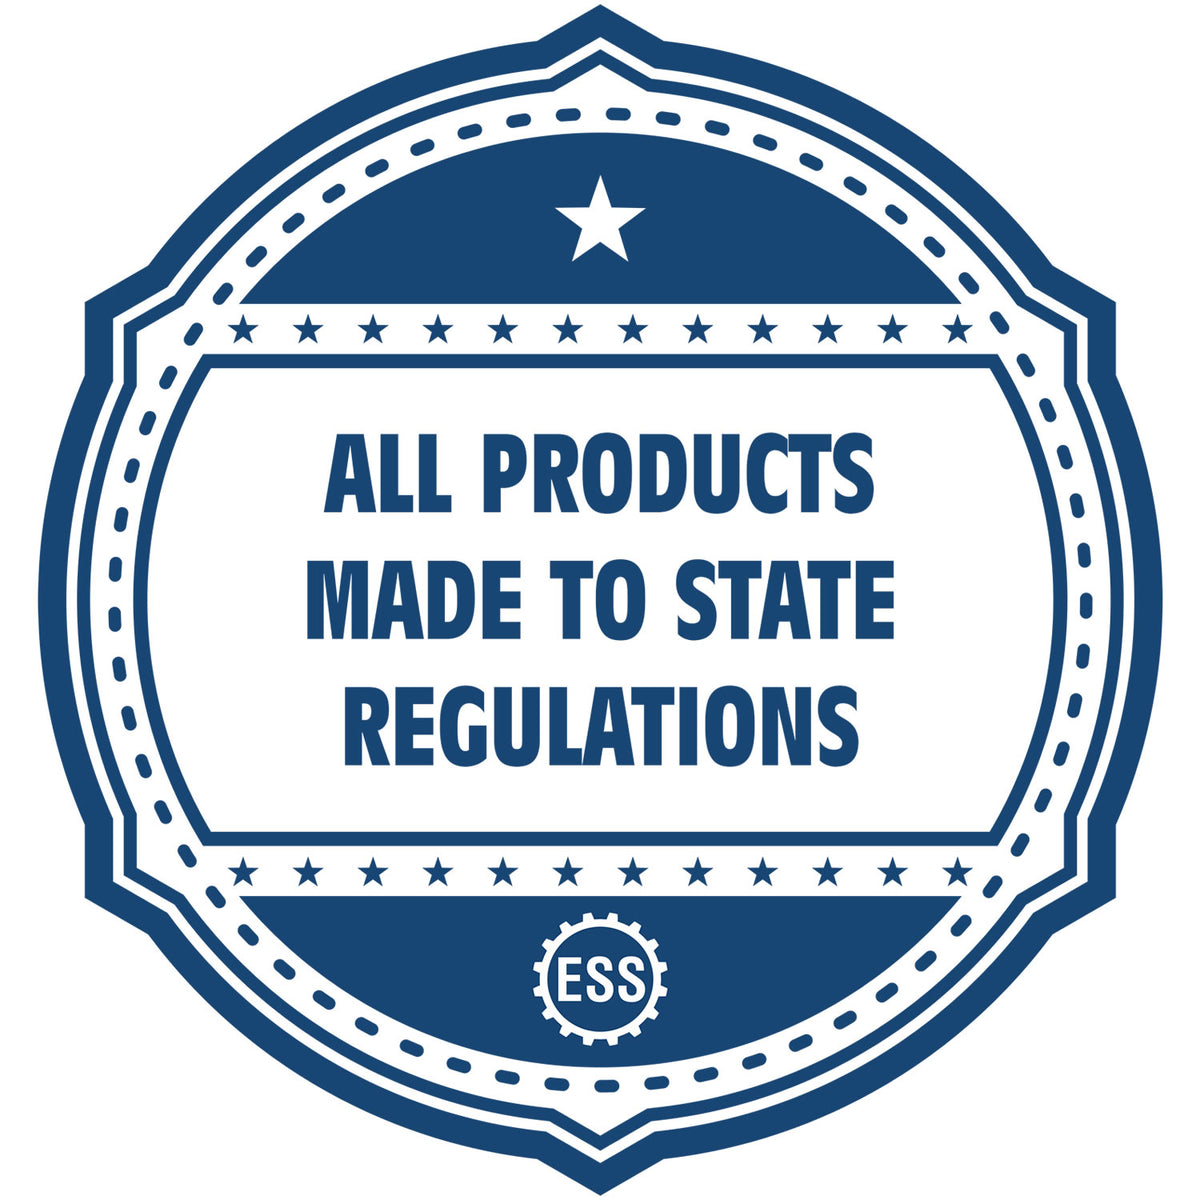 An icon or badge element for the Heavy Duty Cast Iron Pennsylvania Engineer Seal Embosser showing that this product is made in compliance with state regulations.